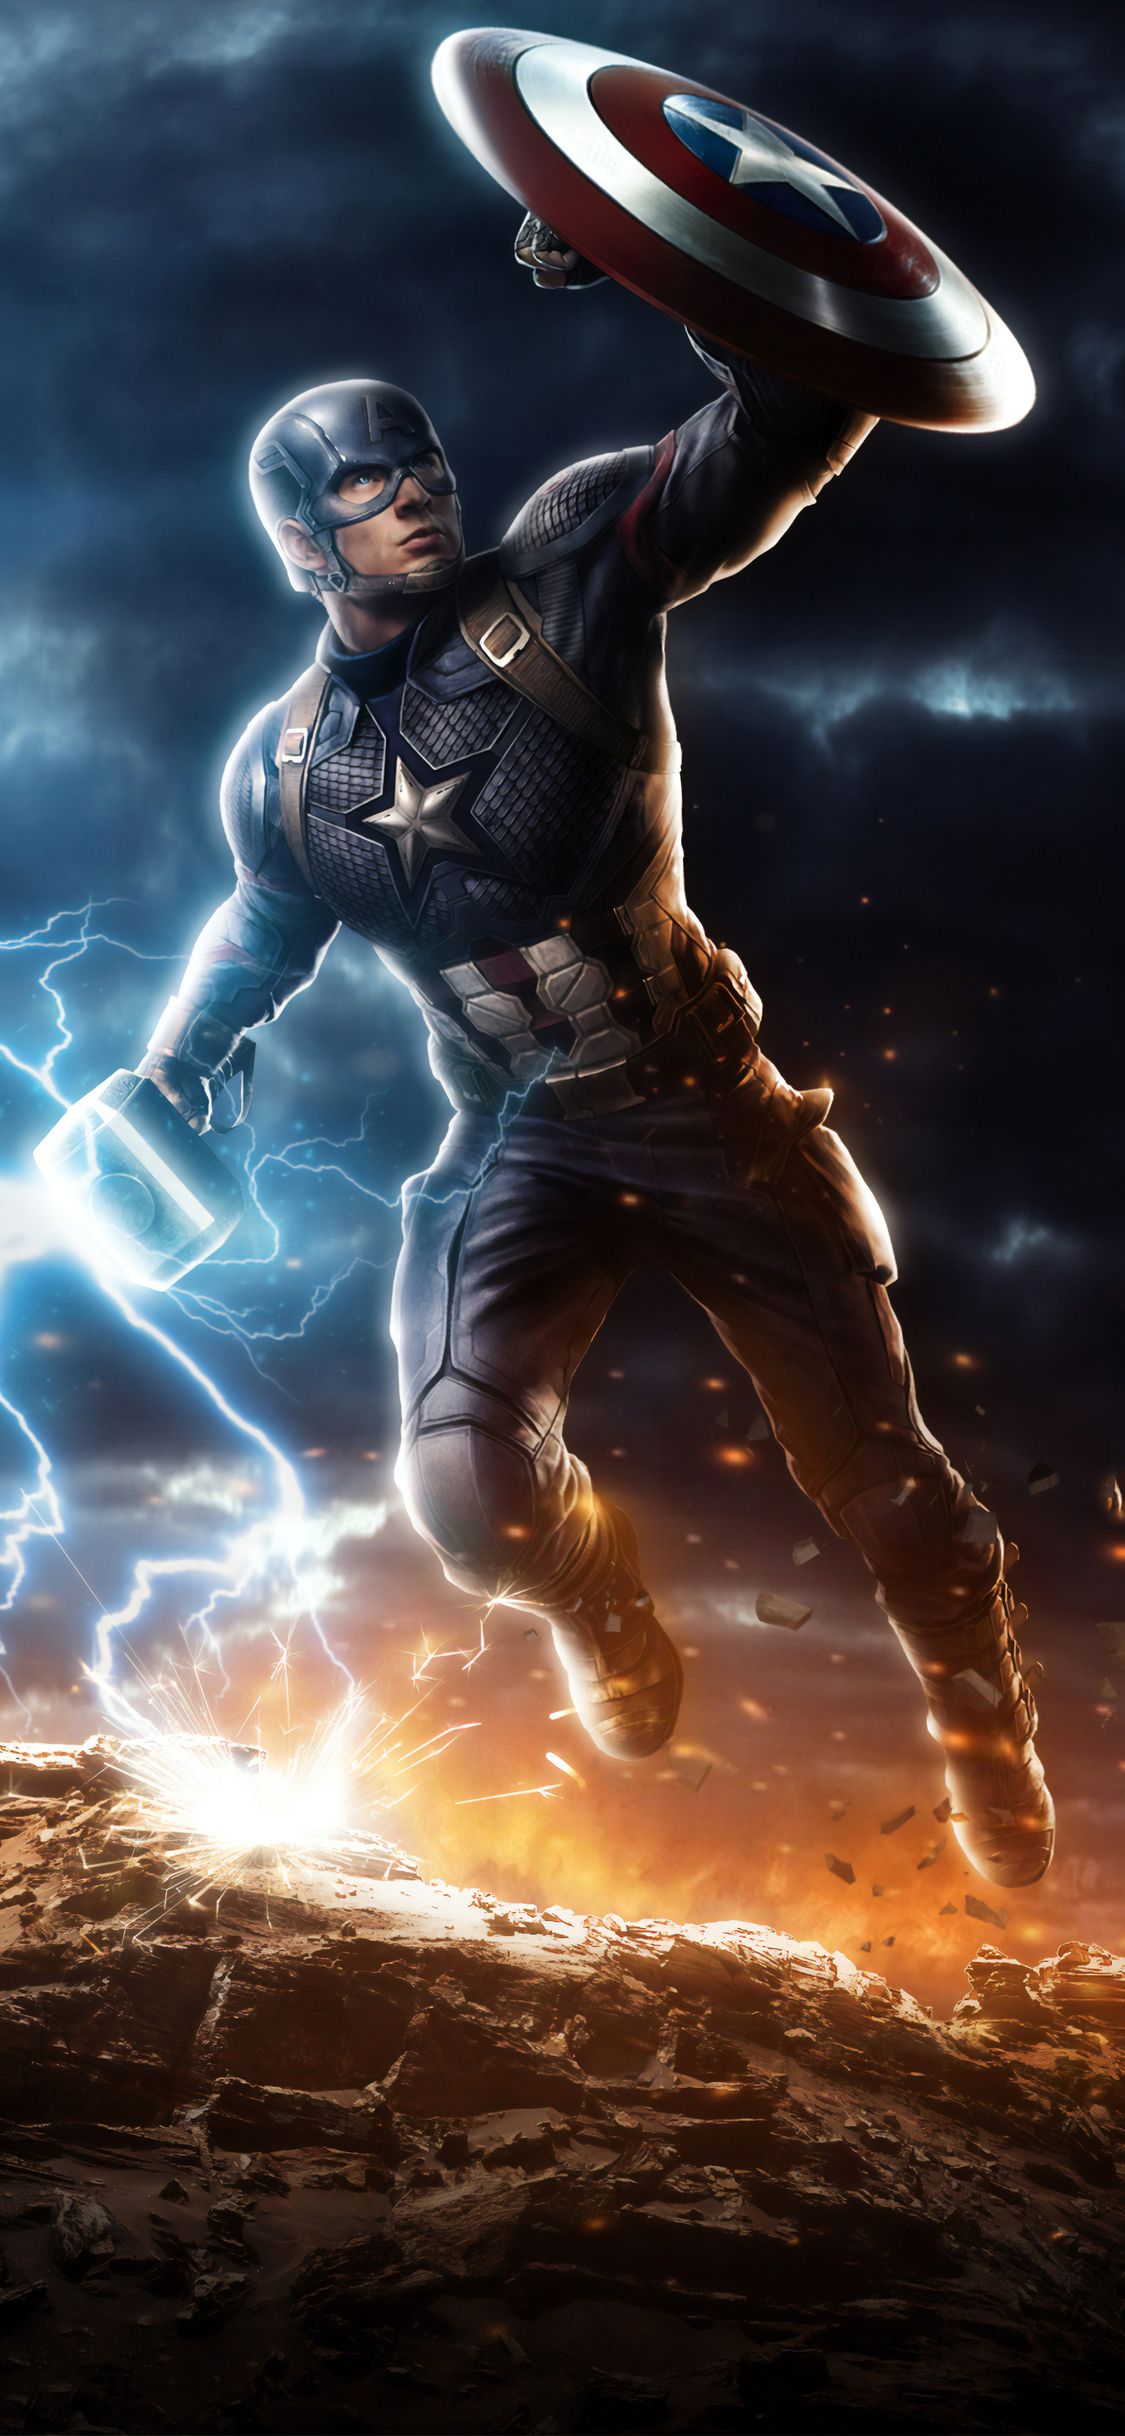 Captain America Mjolnir Avengers Endgame 4k Art iPhone XS, iPhone iPhone X HD 4k Wallpaper, Image, Background, Photo and Picture